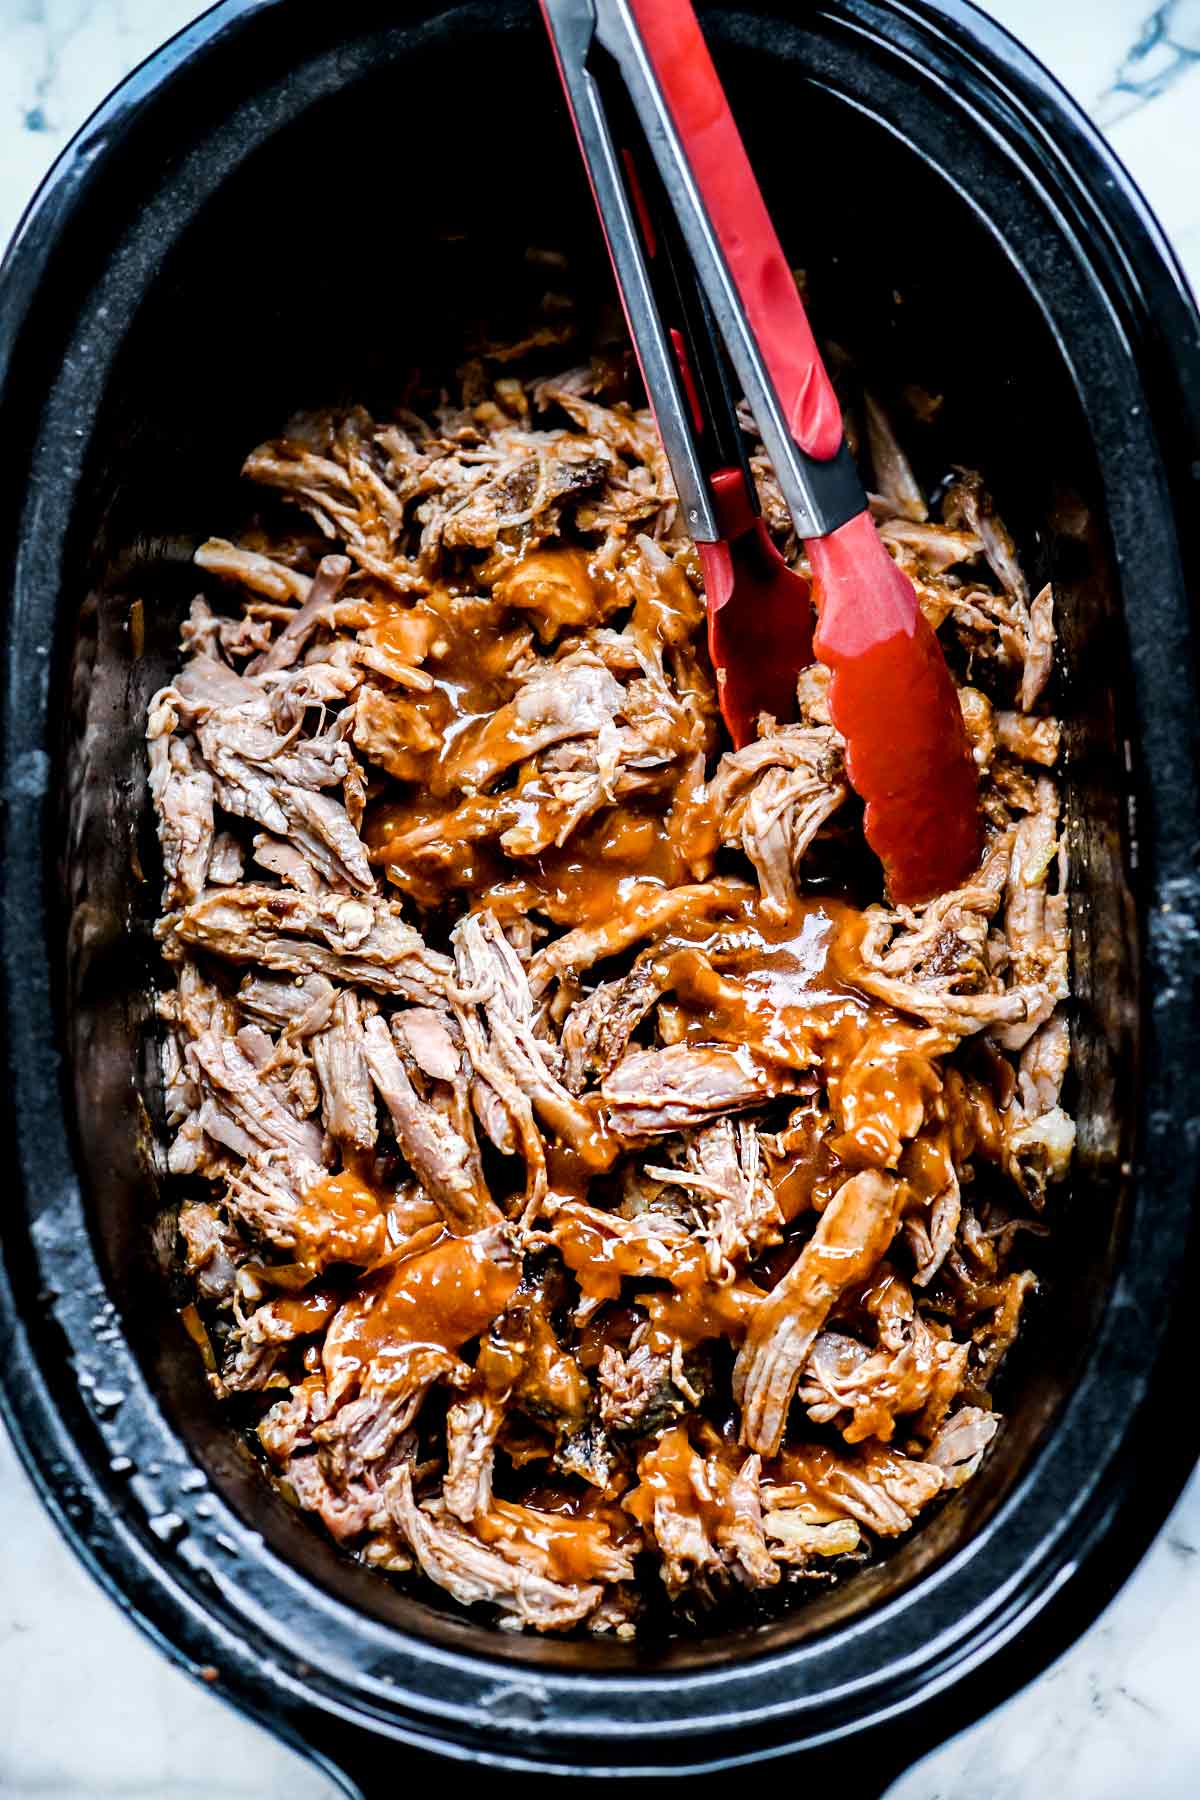 How to prepare pulled pork